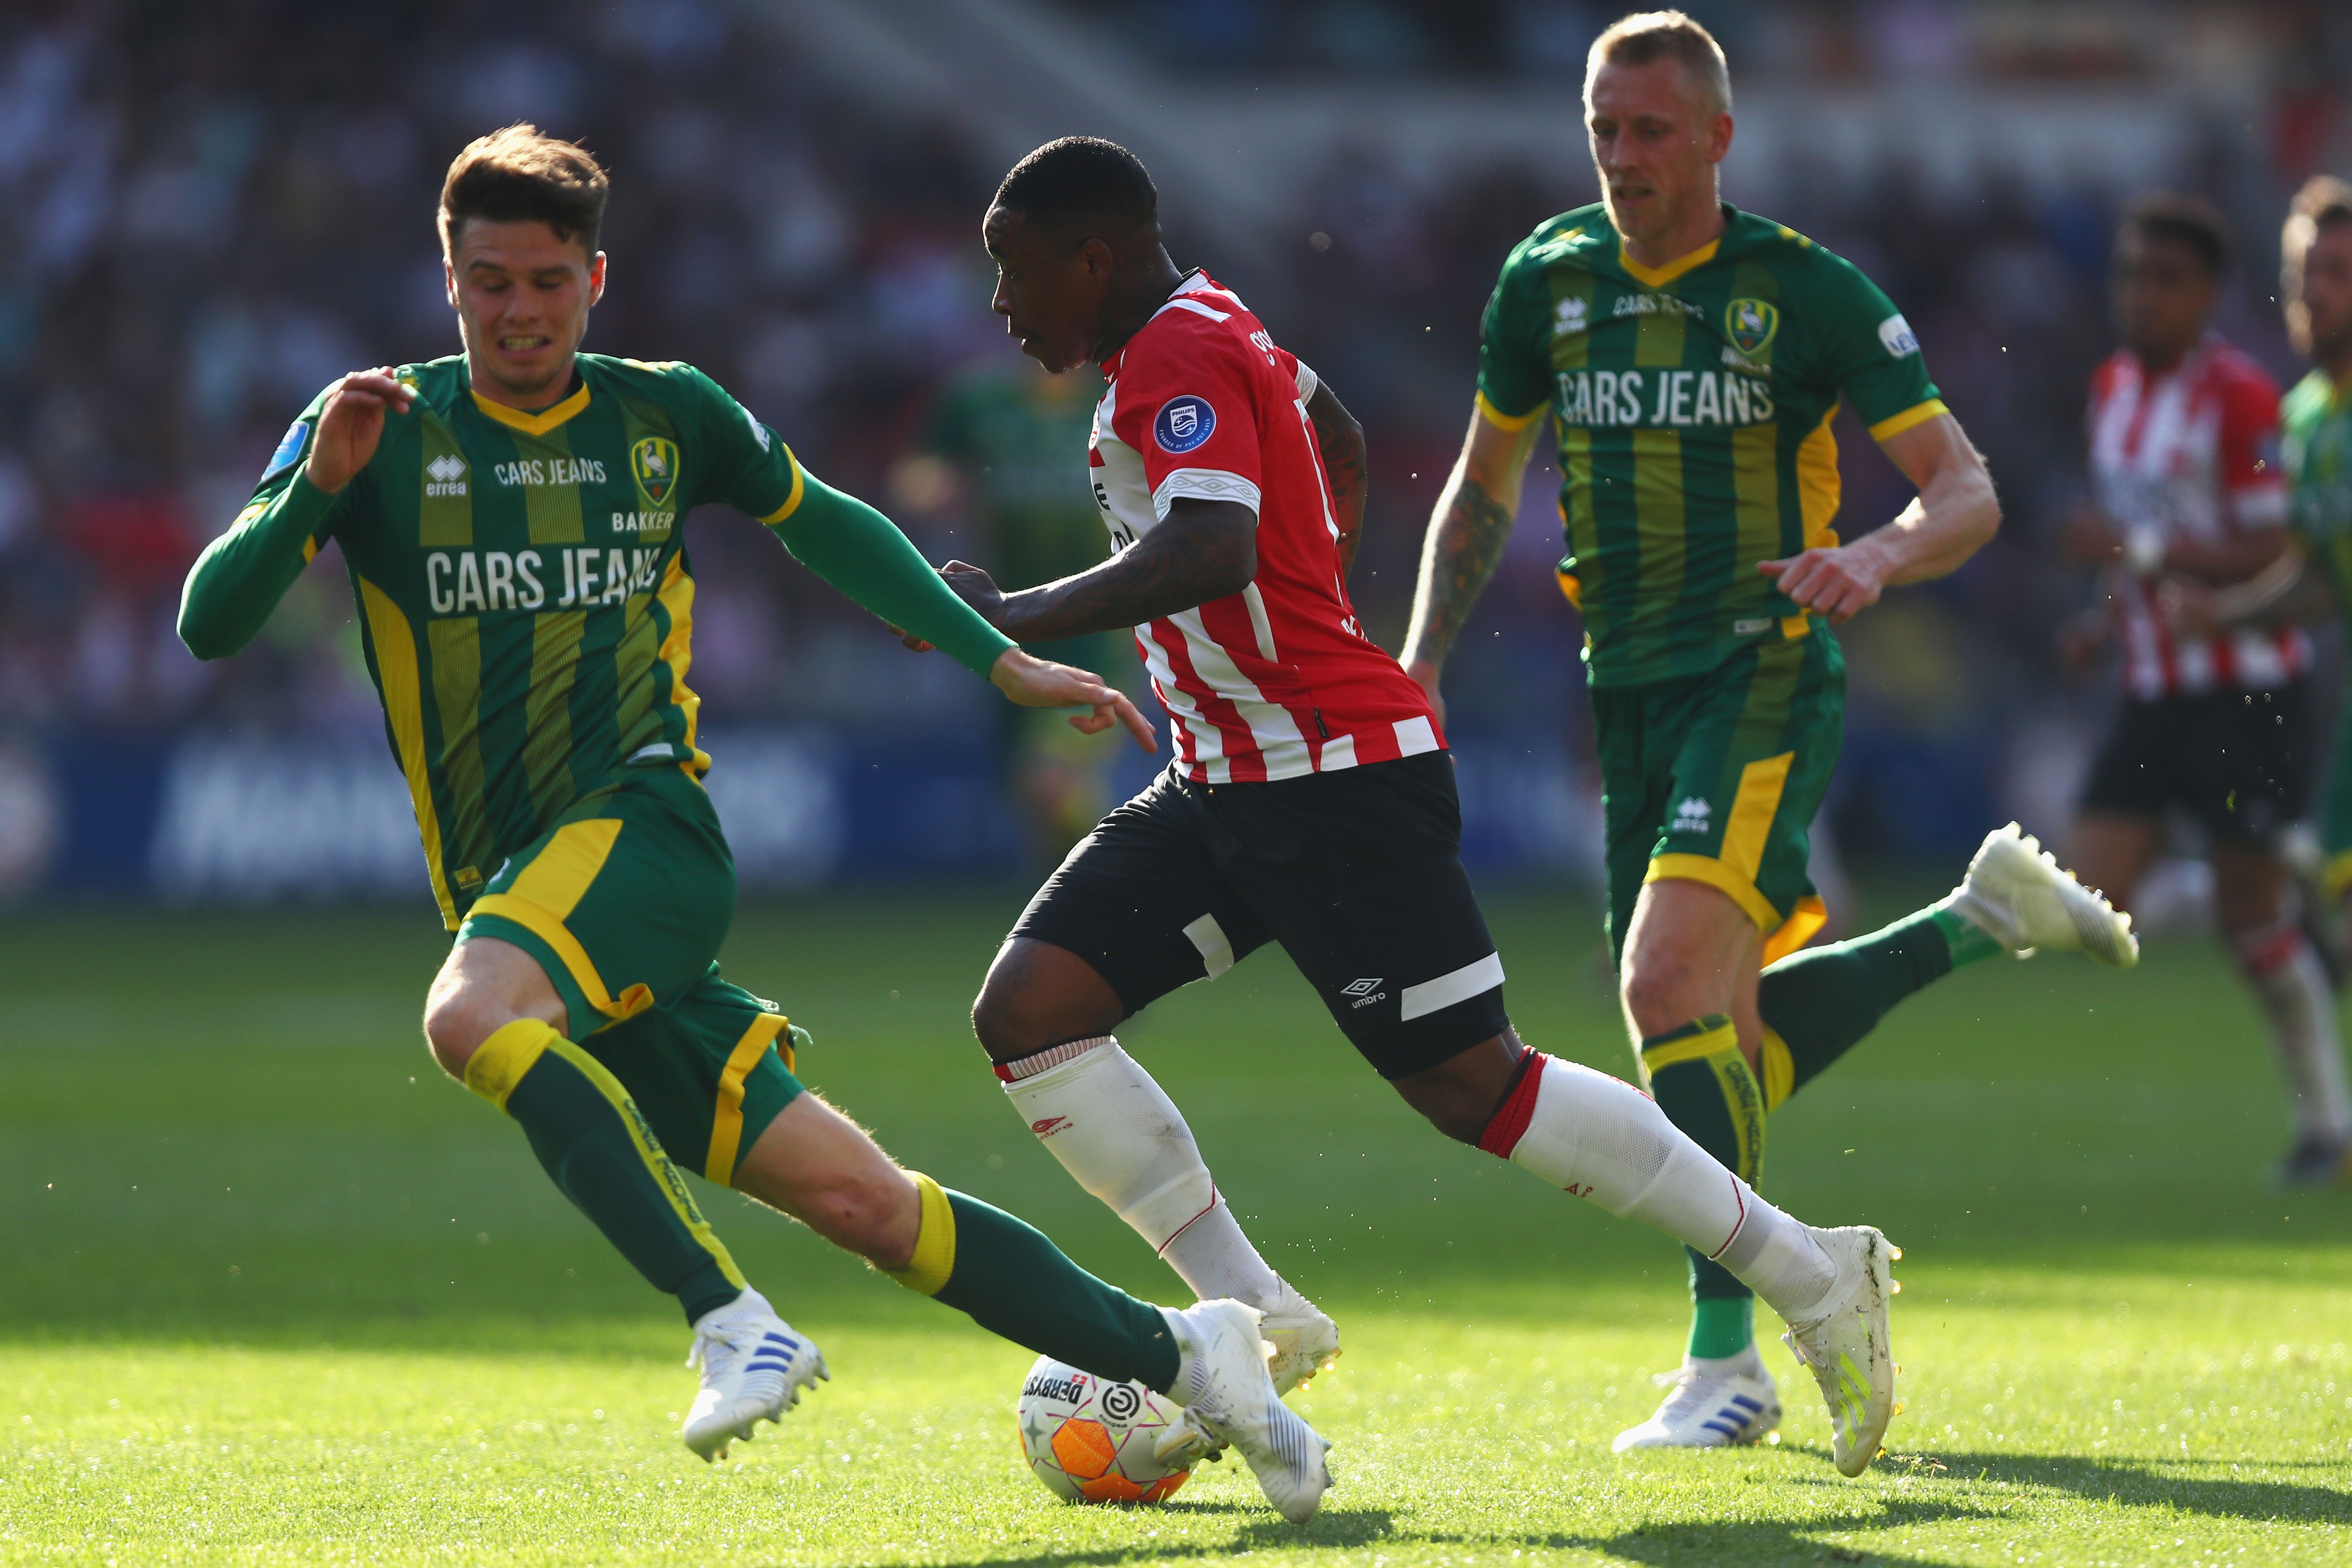 EINDHOVEN, NETHERLANDS - APRIL 21: Steven Bergwijn of PSV battles for the ball with Danny Bakker and Lex Immers of ADO Den Haag during the Eredivisie match between PSV and ADO Den Haag at Philips Stadion on April 21, 2019 in Eindhoven, Netherlands. (Photo by Dean Mouhtaropoulos/Getty Images)